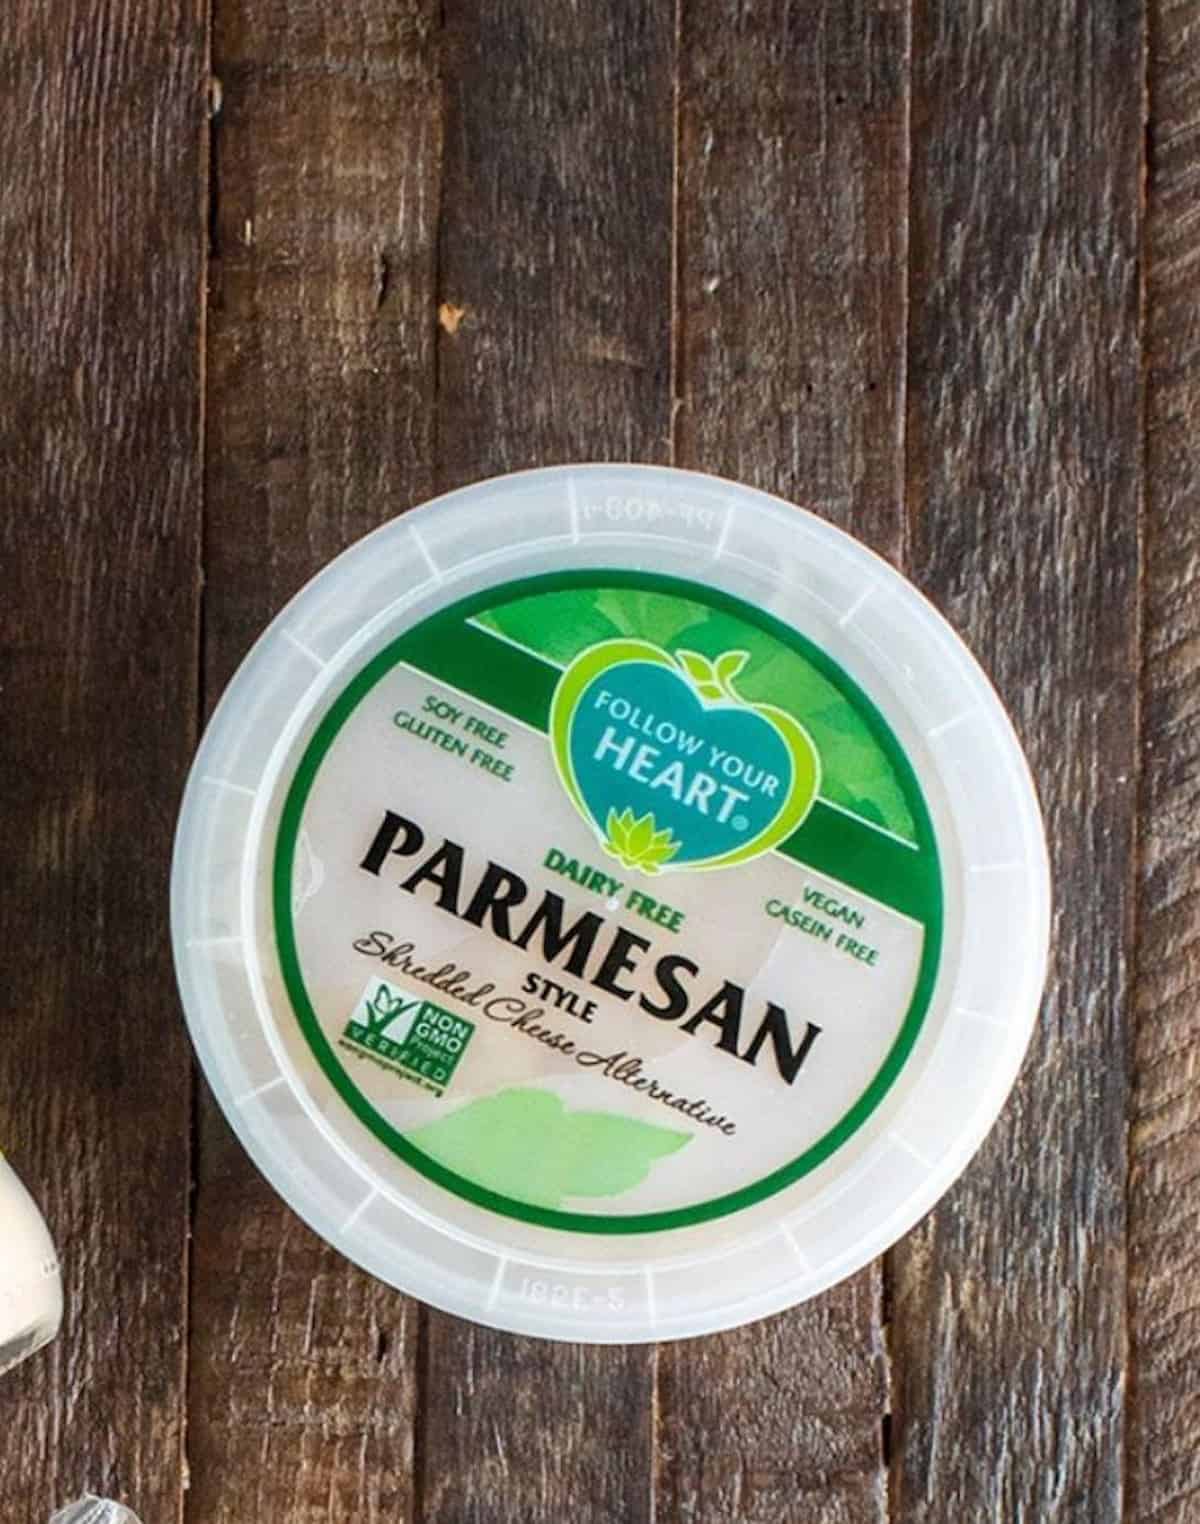 Follow Your Heart brand dairy-free parmesan shreds.